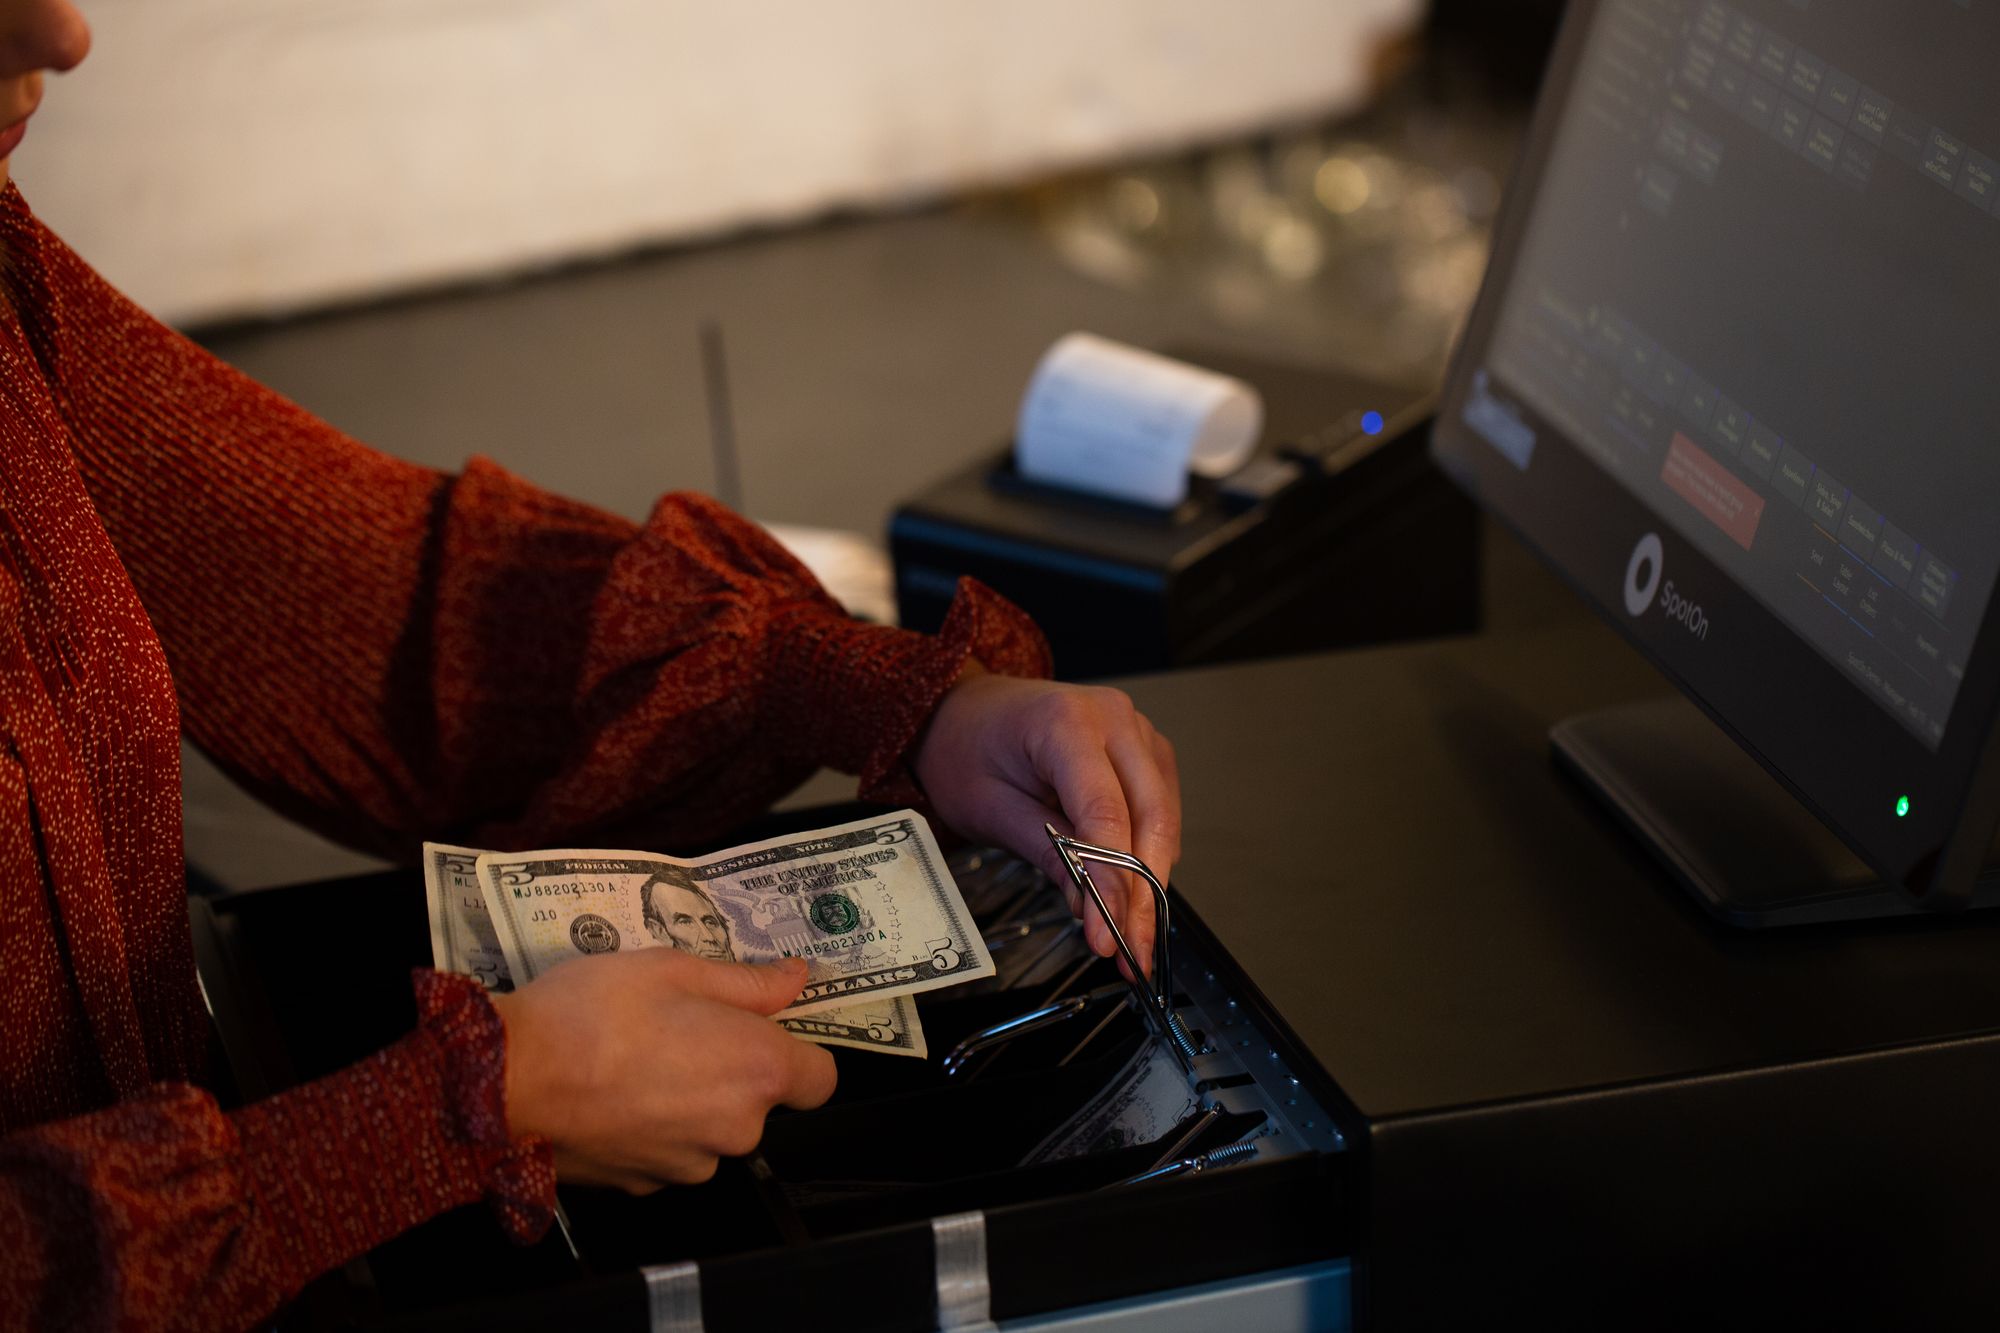 A server places cash in the cash drawer of a restaurant point of sale.